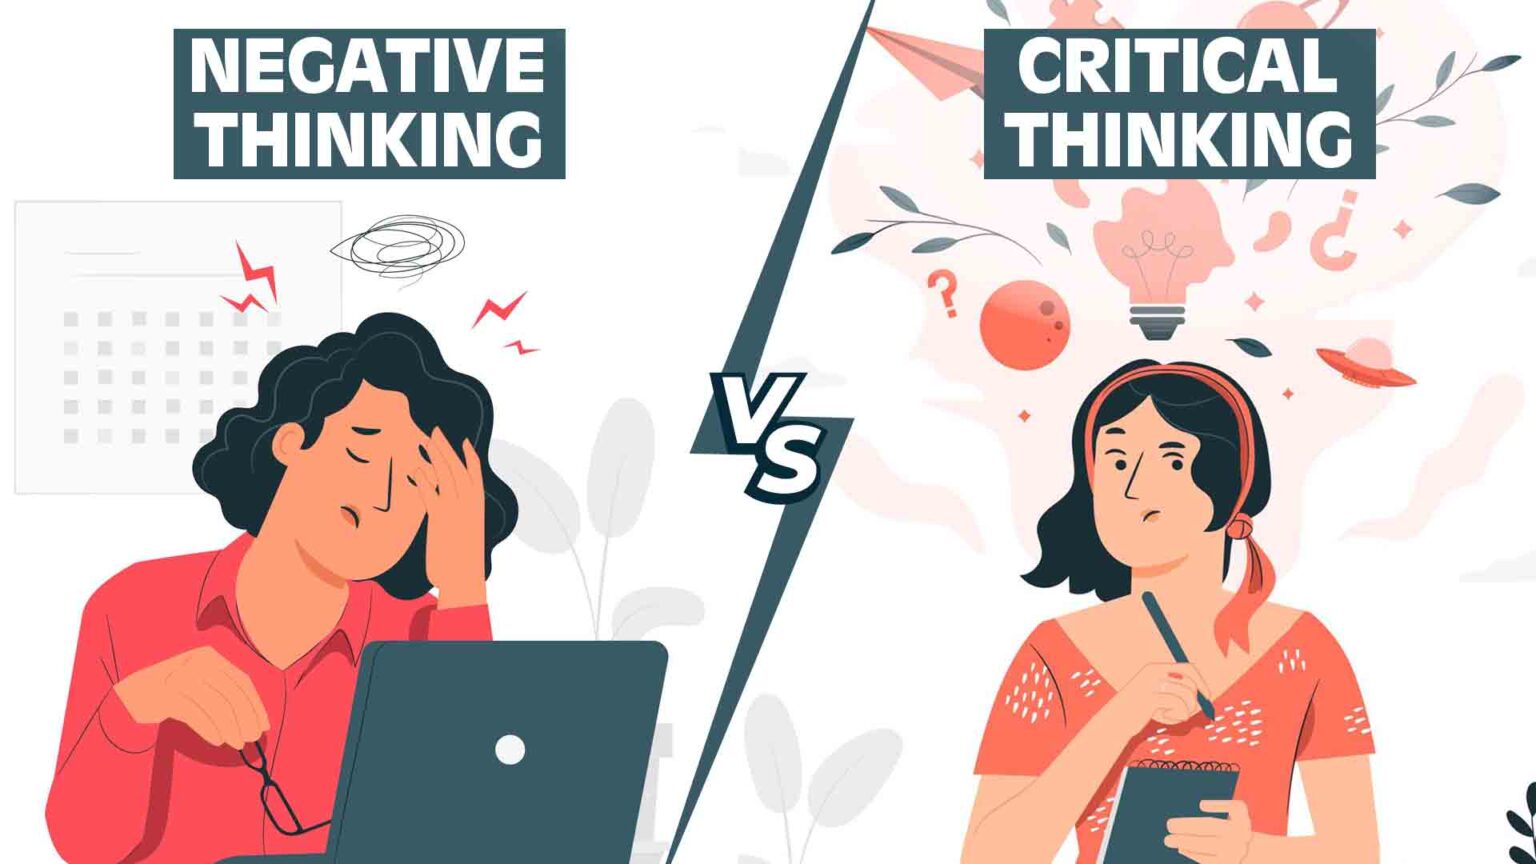 what is the difference between negative thinking and critical thinking